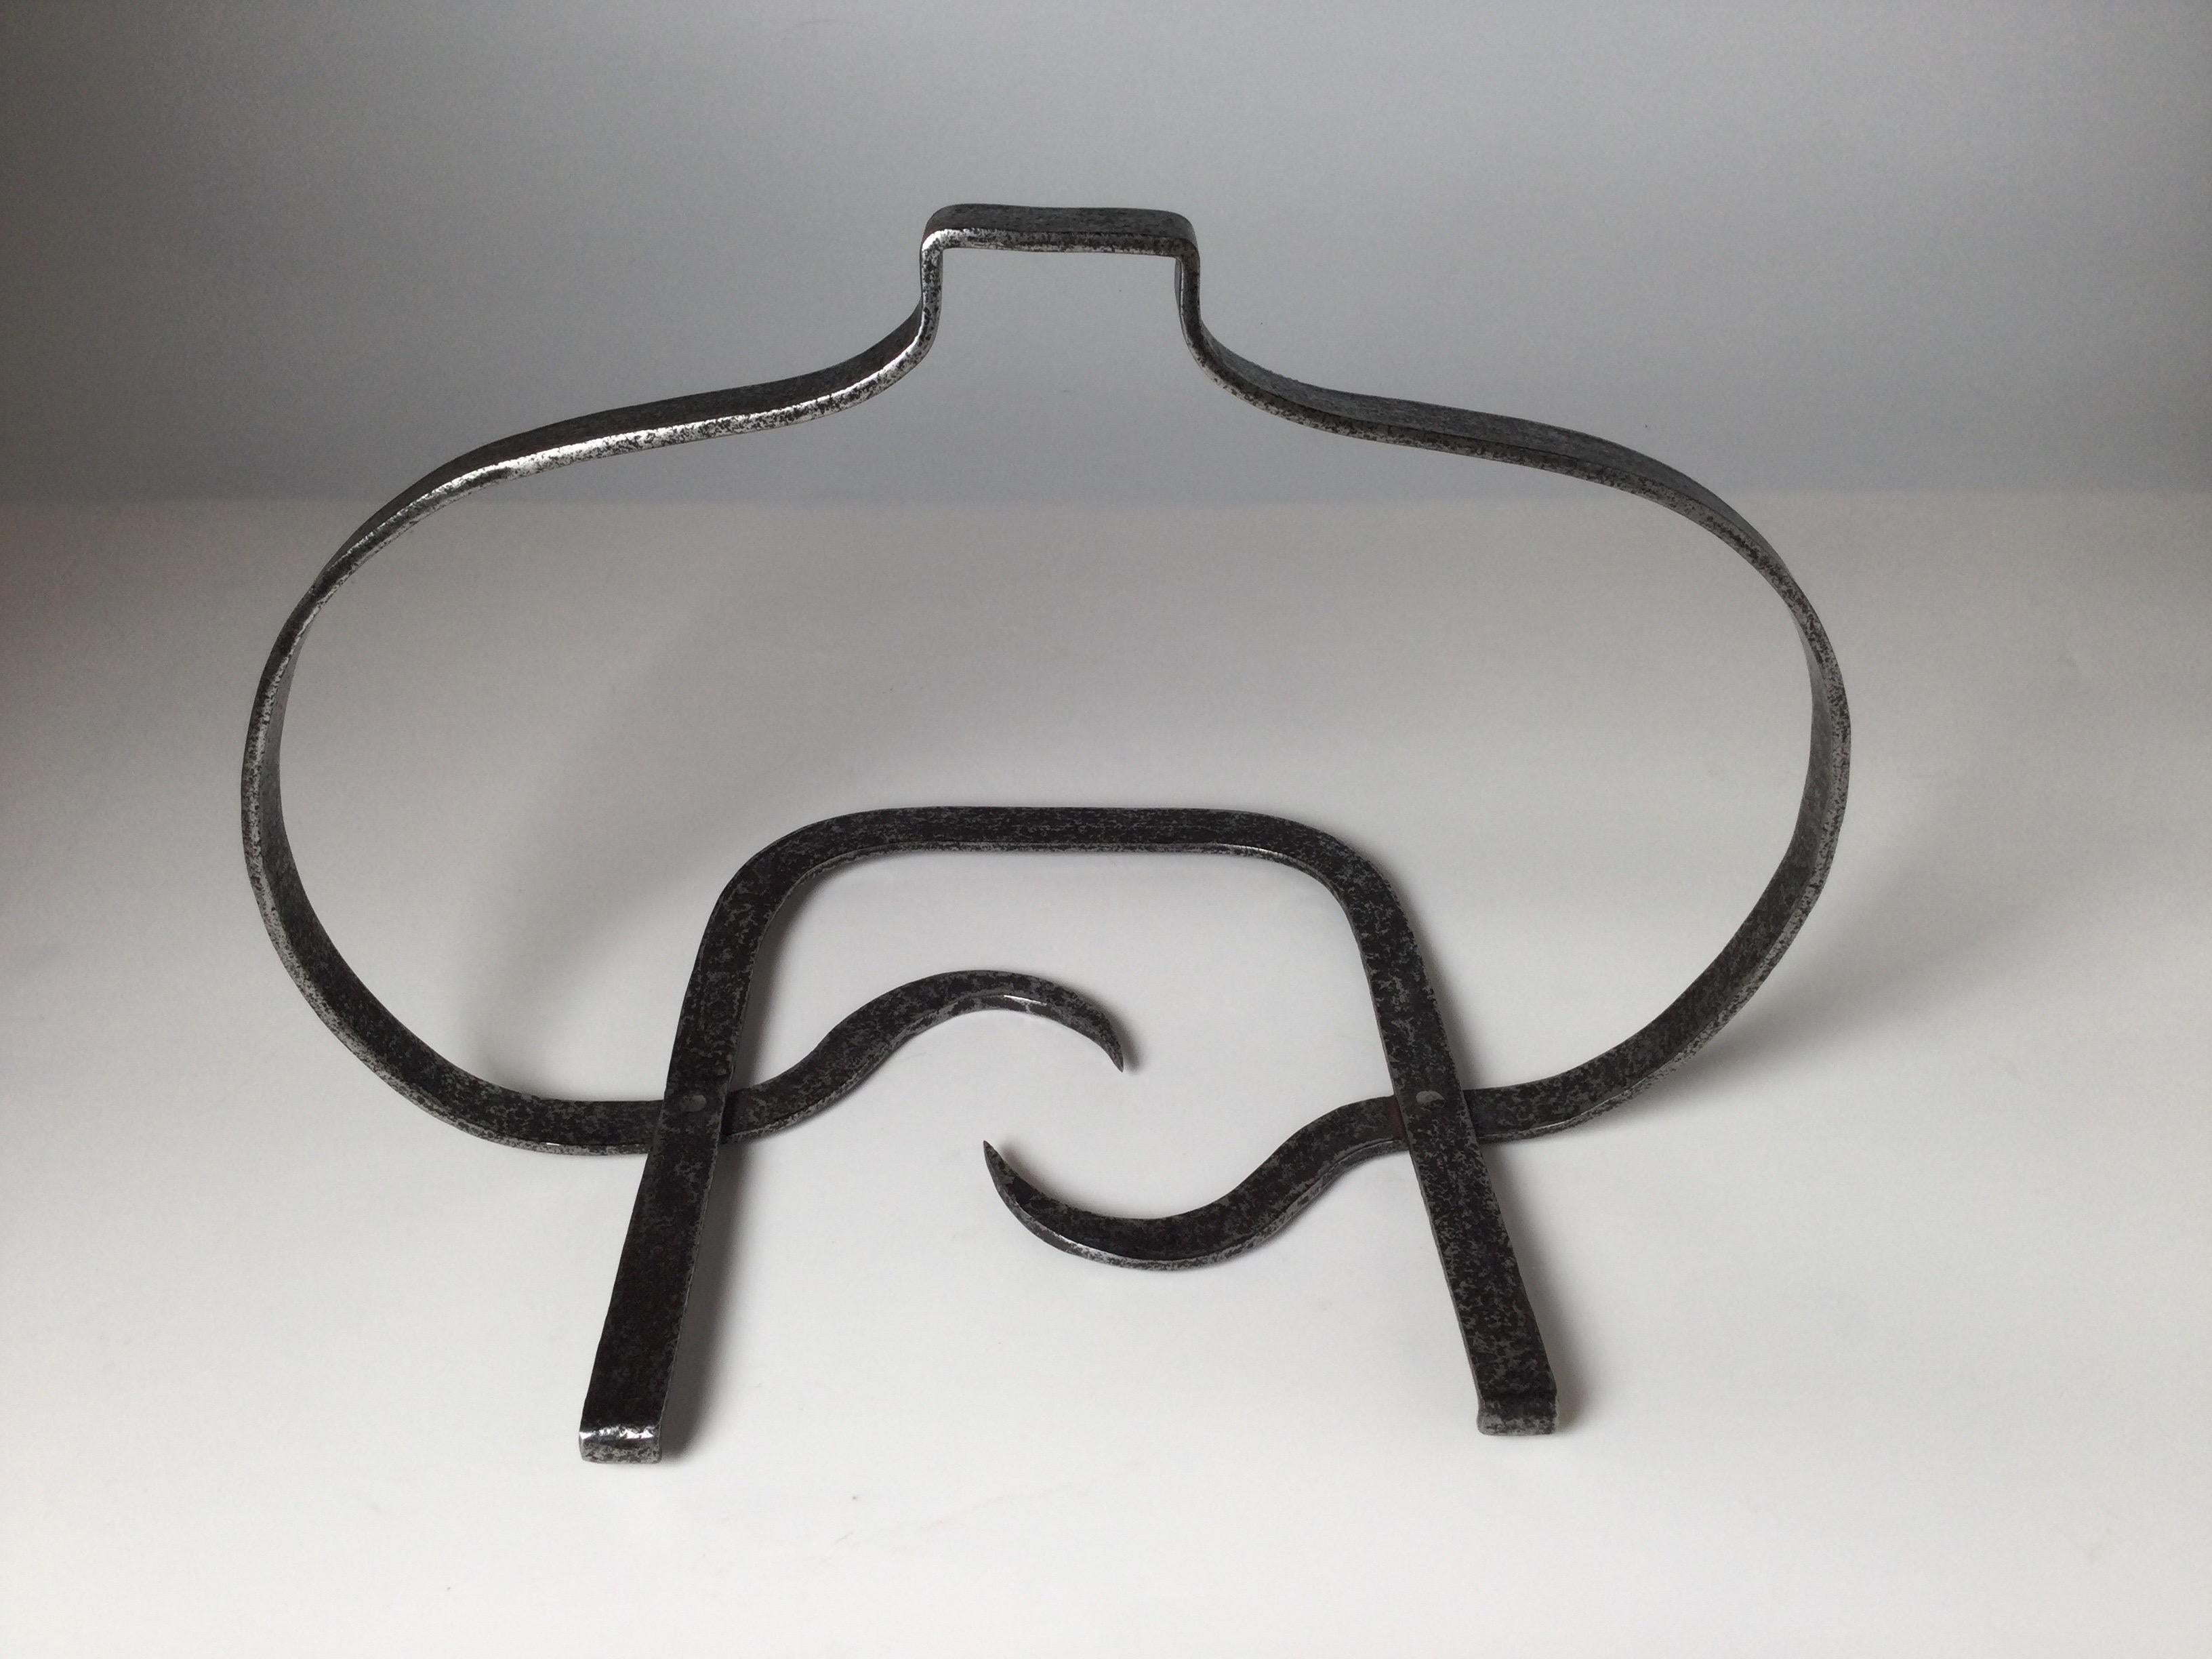 Antique Early hand forged fireplace cooking trivet. This was used to hold pots inside a stone fireplace in the 19th Century.